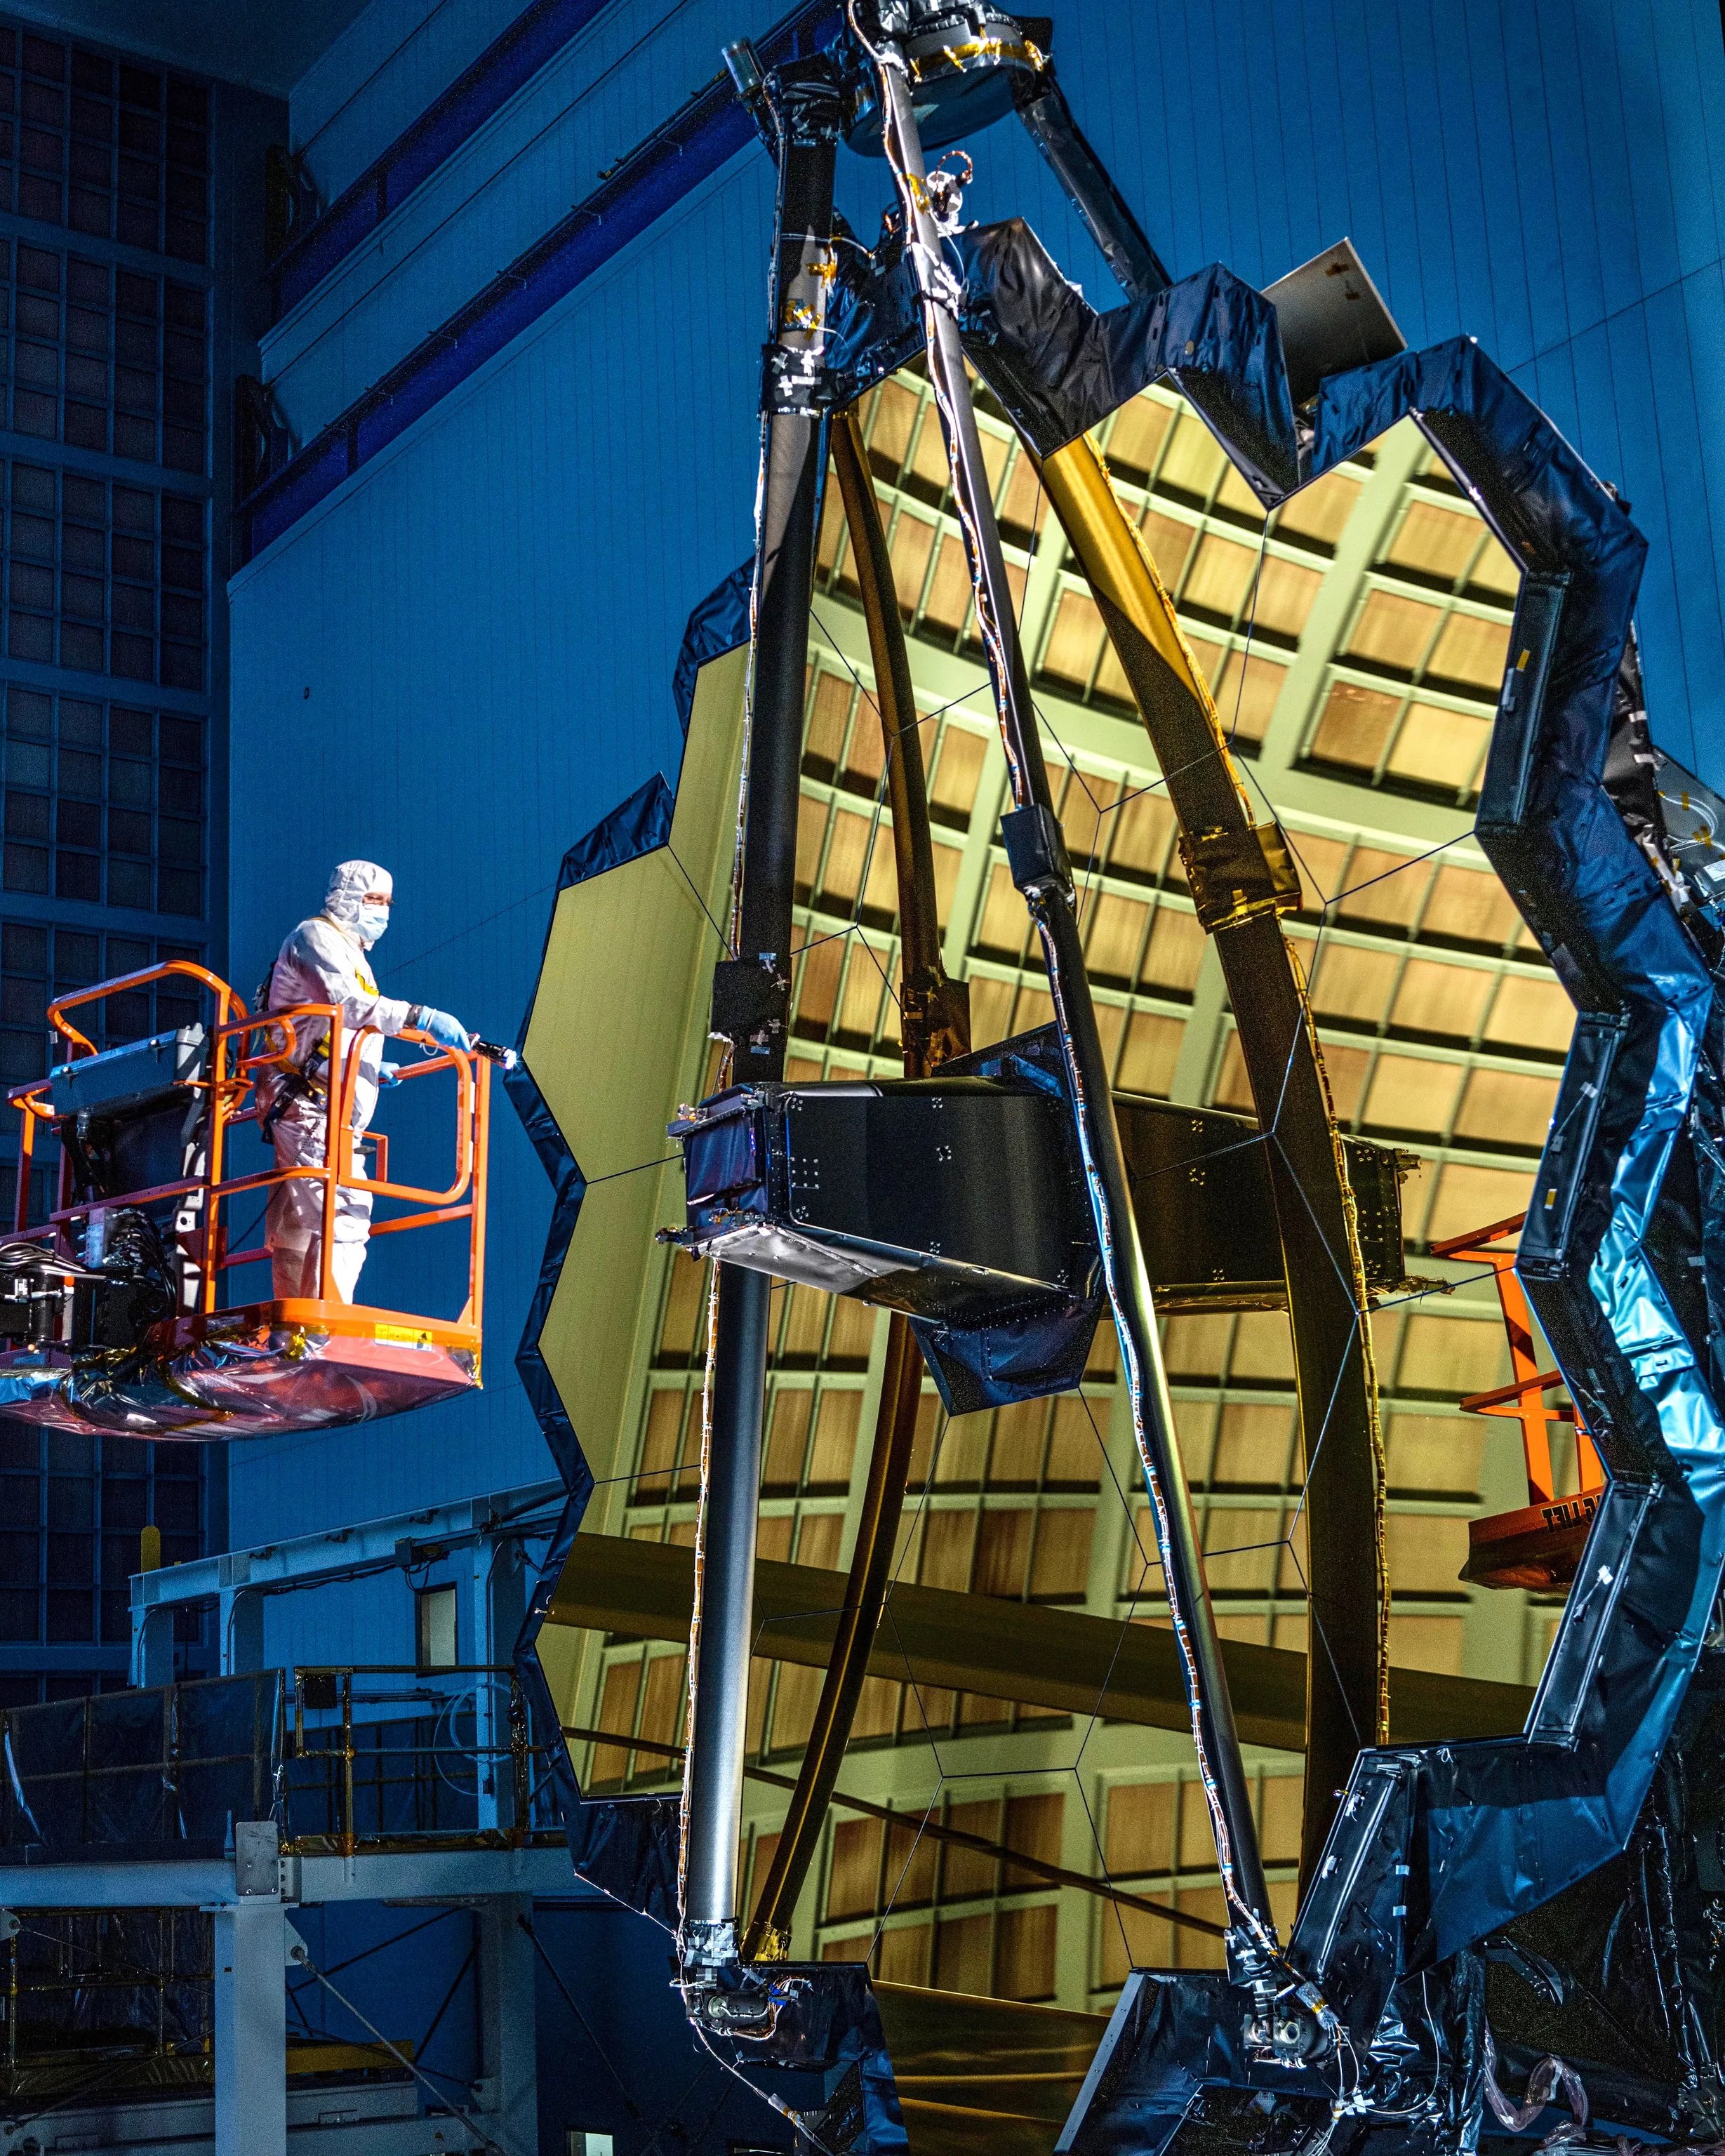 Archival image of the James Webb Space Telescope's mirror